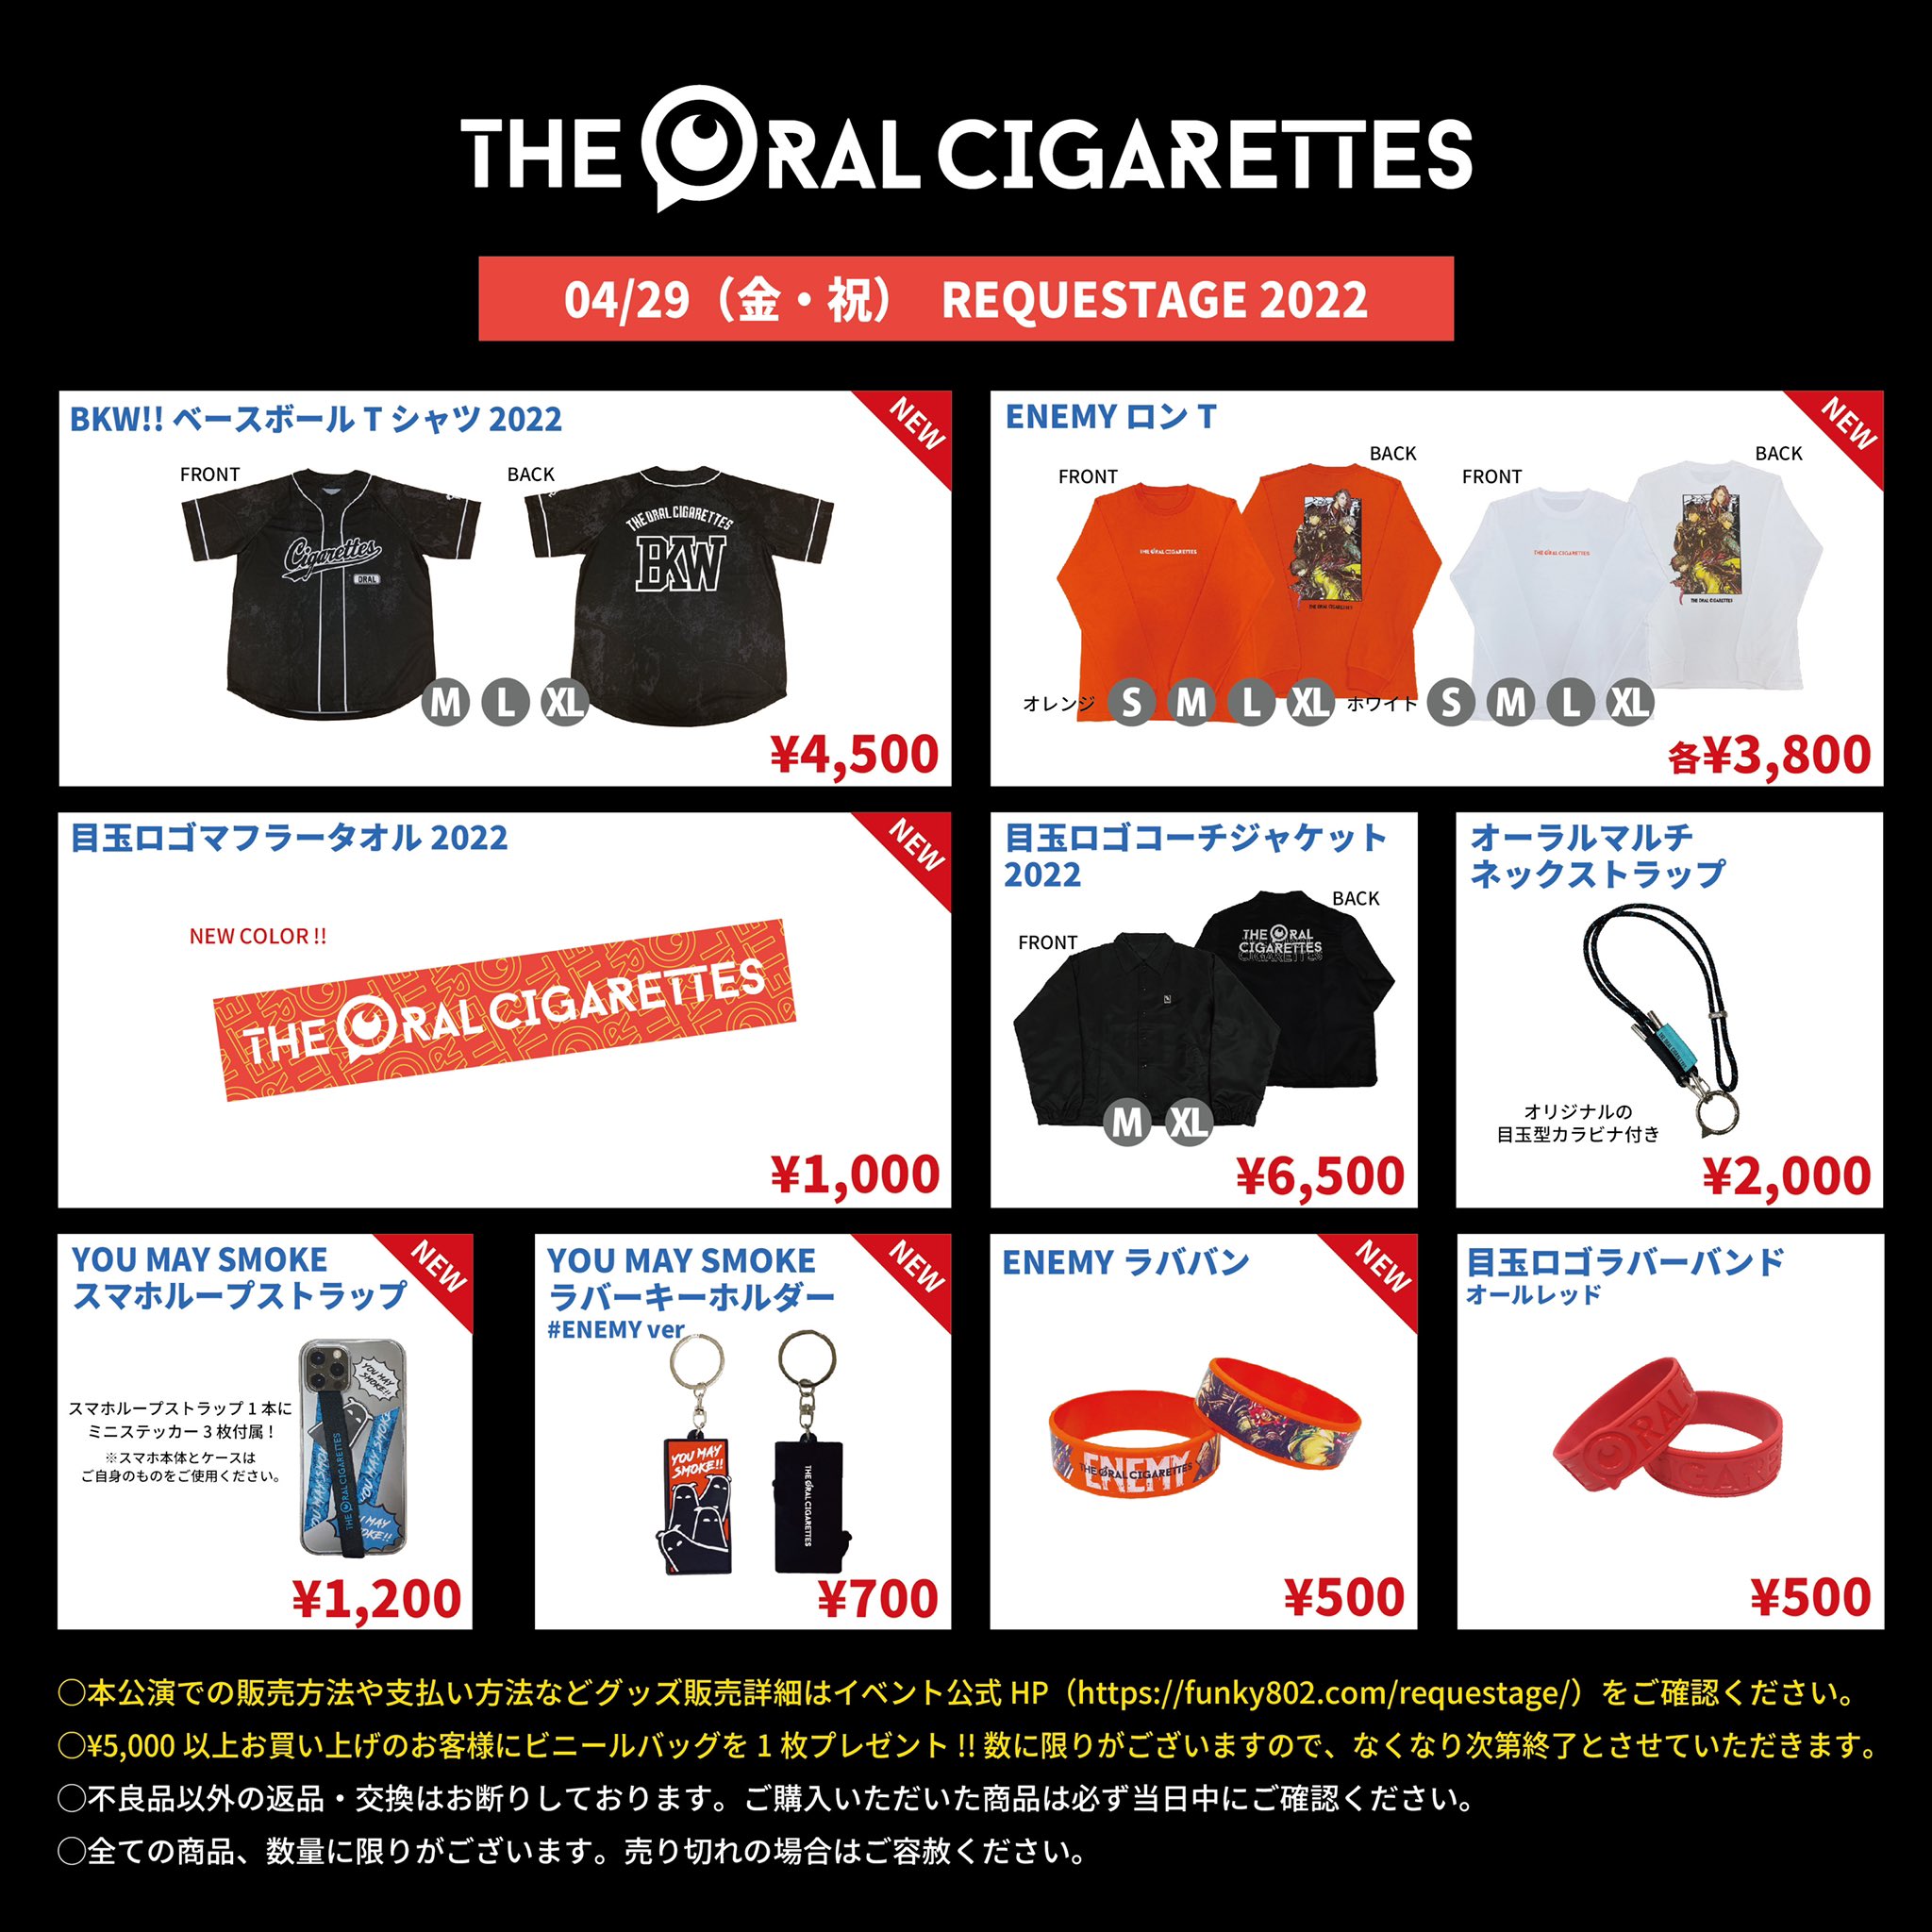 THE ORAL CIGARETTESグッズ各種